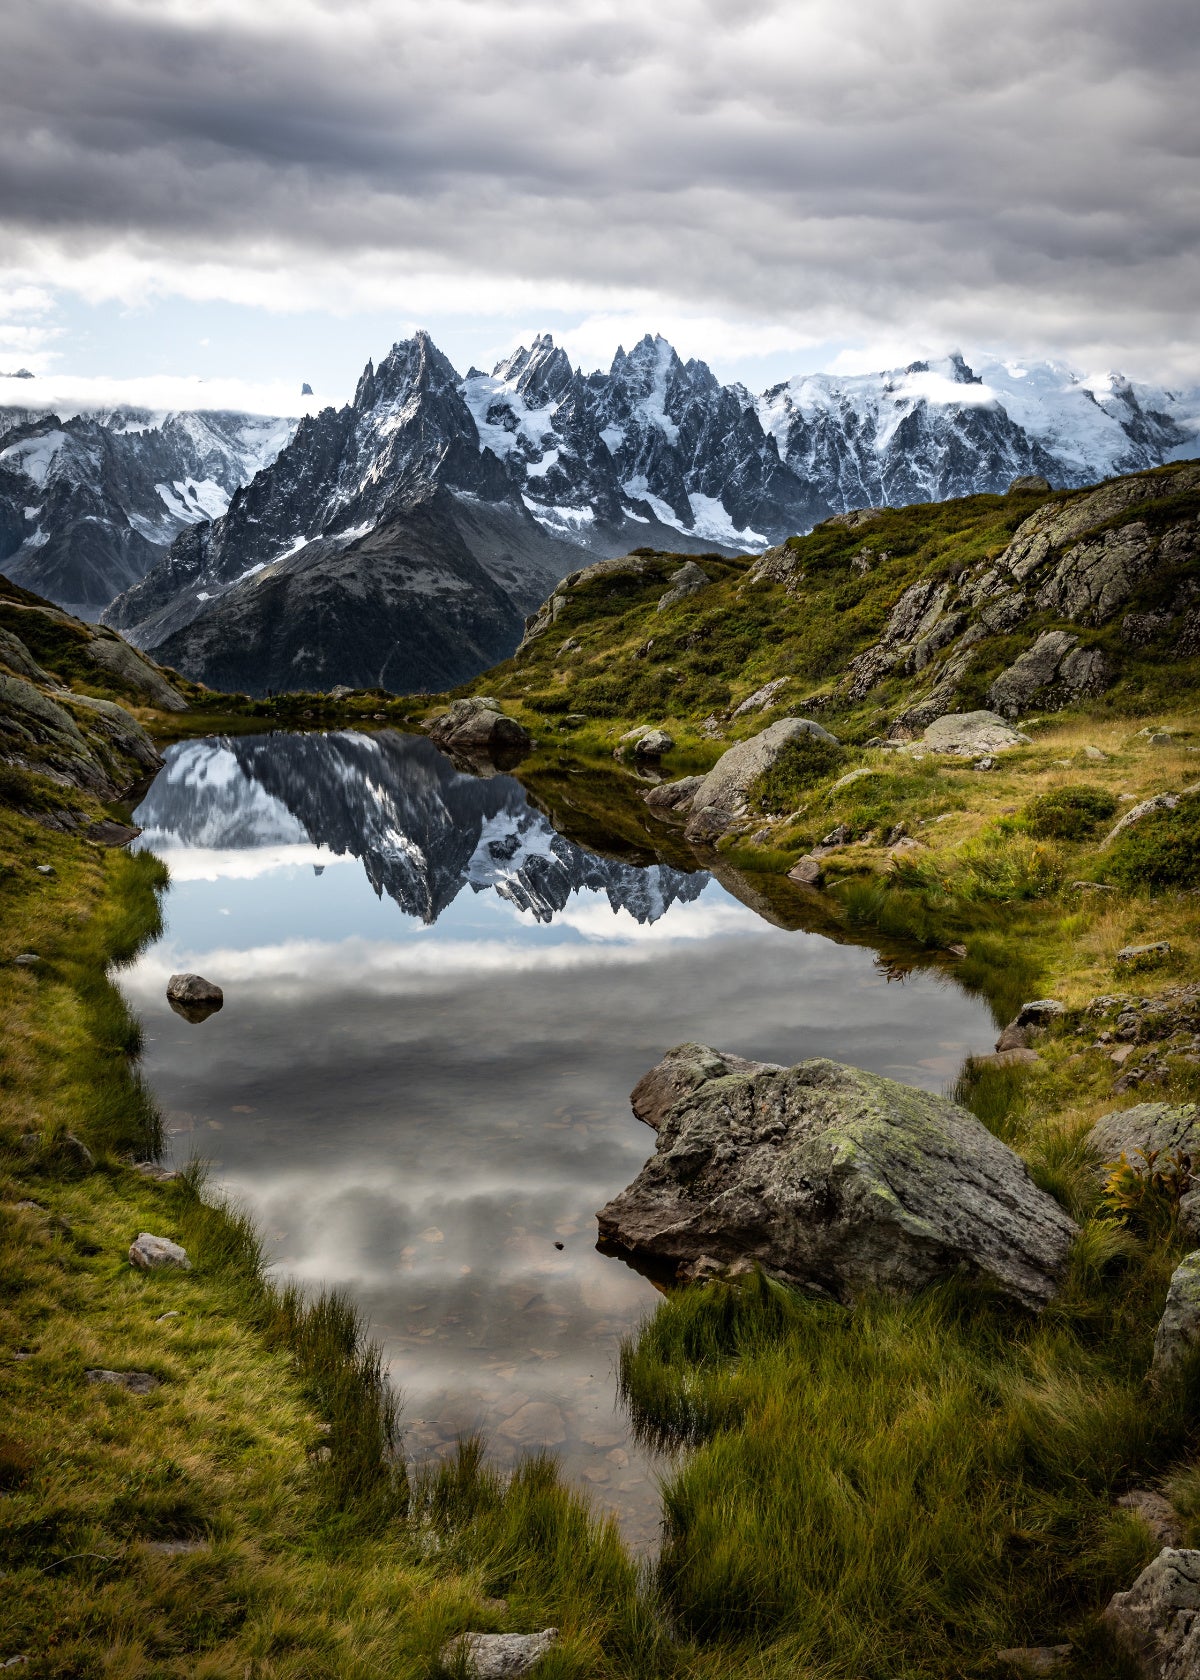 The Story Behind The Image - Alpine Reflection